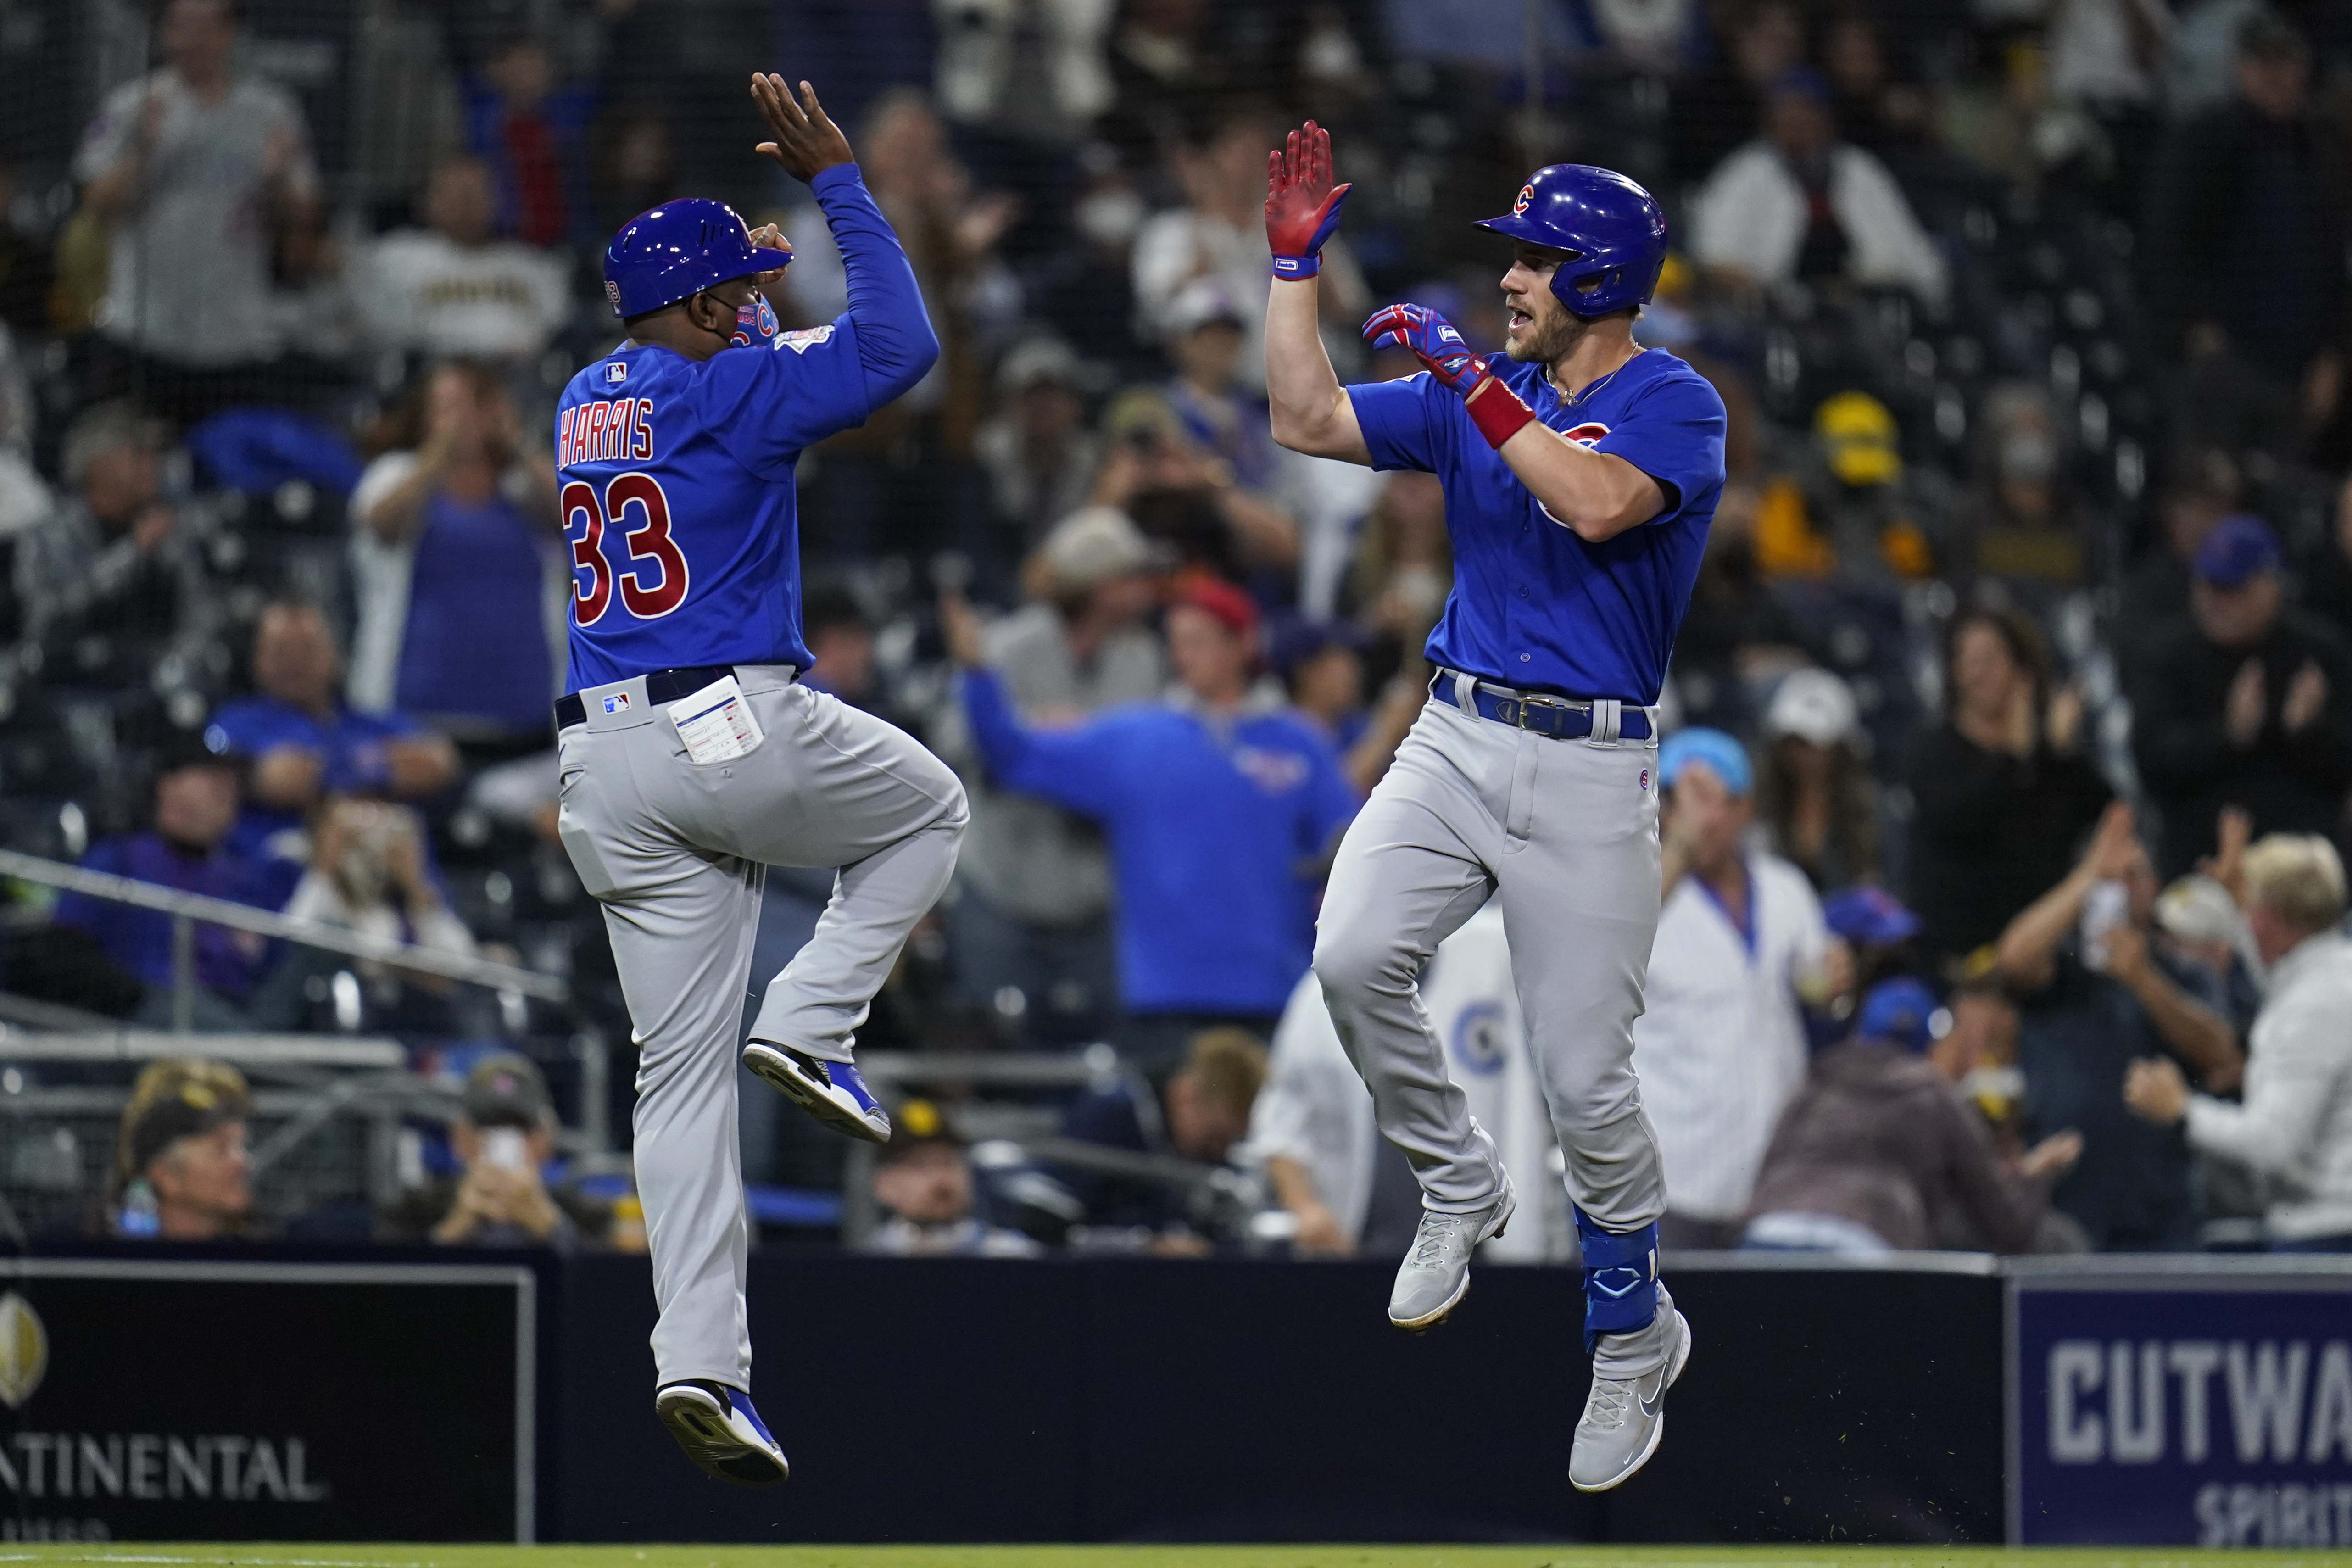 See David Ross homer for the Chicago Cubs in Game 7 of the World Series 